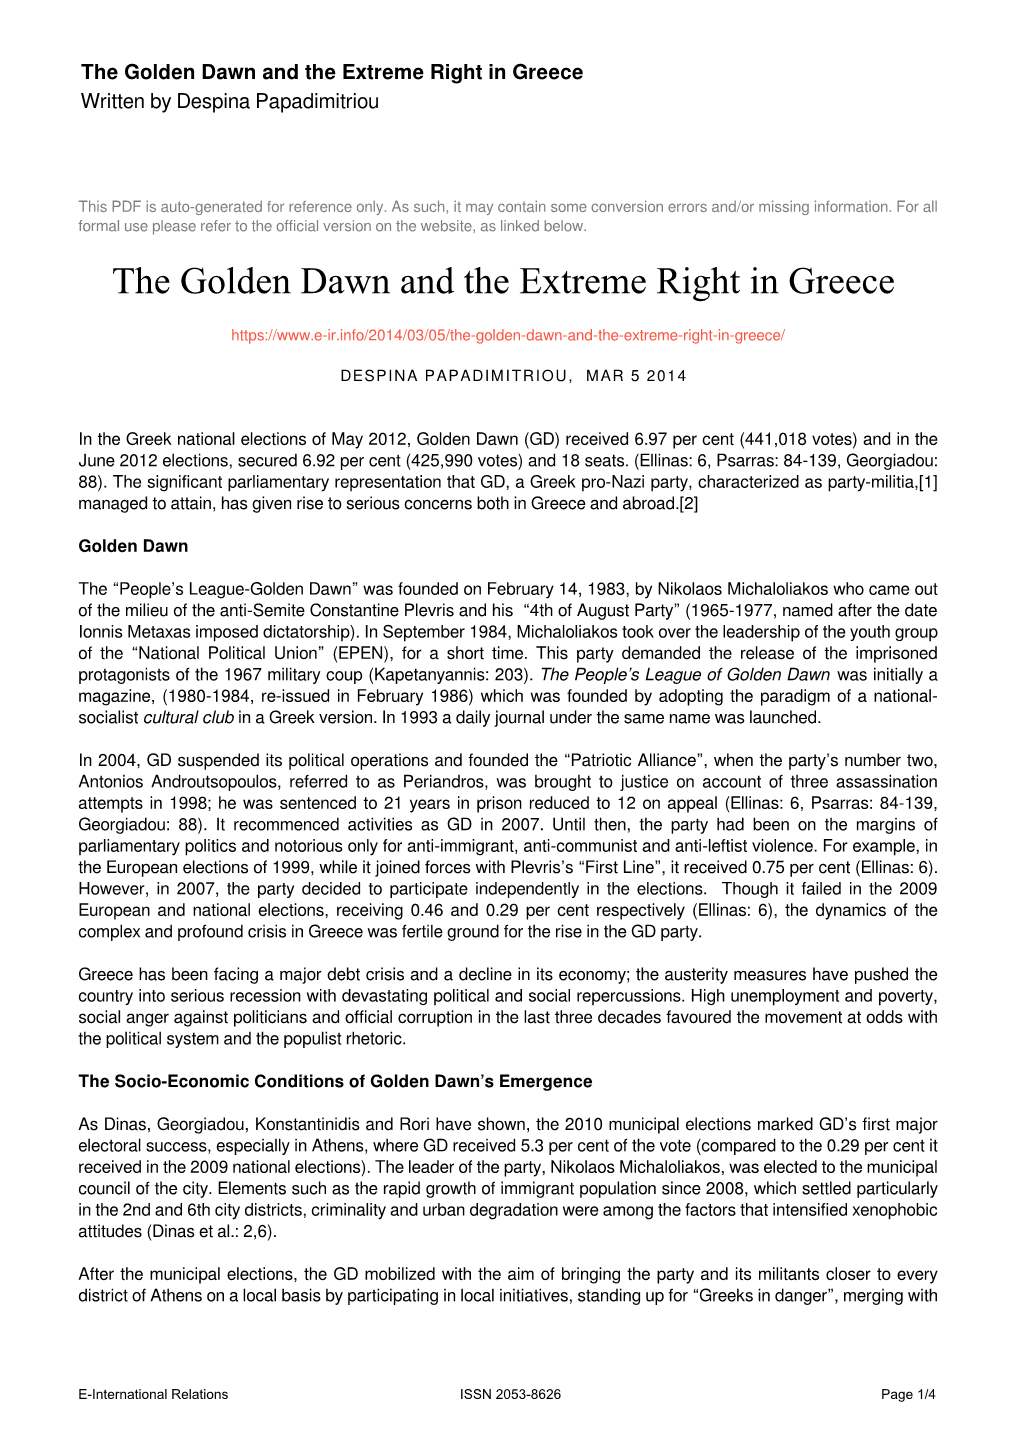 The Golden Dawn and the Extreme Right in Greece Written by Despina Papadimitriou